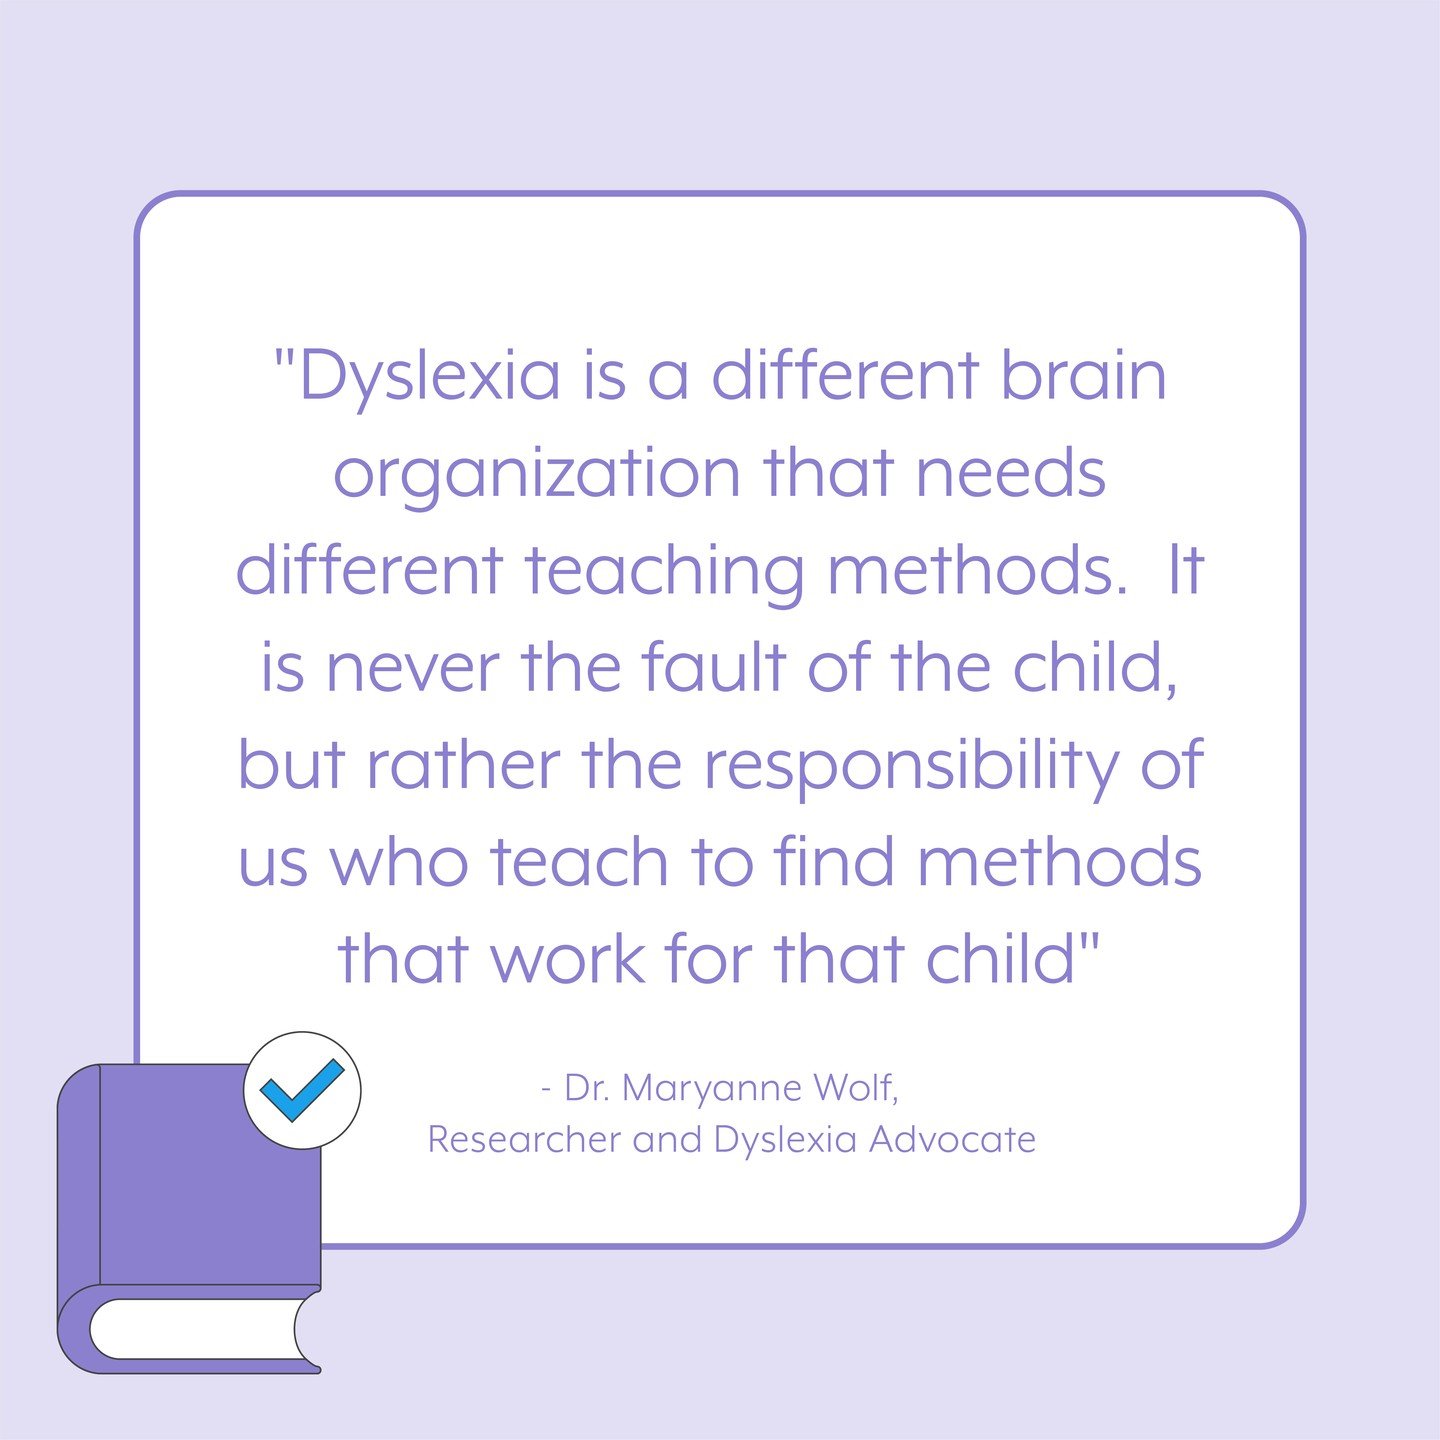 Children with dyslexia usually have average to above average cognitive ability. They are so smart and creative, but cannot learn to read without explicit, multi-sensory phonics methods based on the science of reading.

.
.
.
.
#dyslexia #signsofdysle